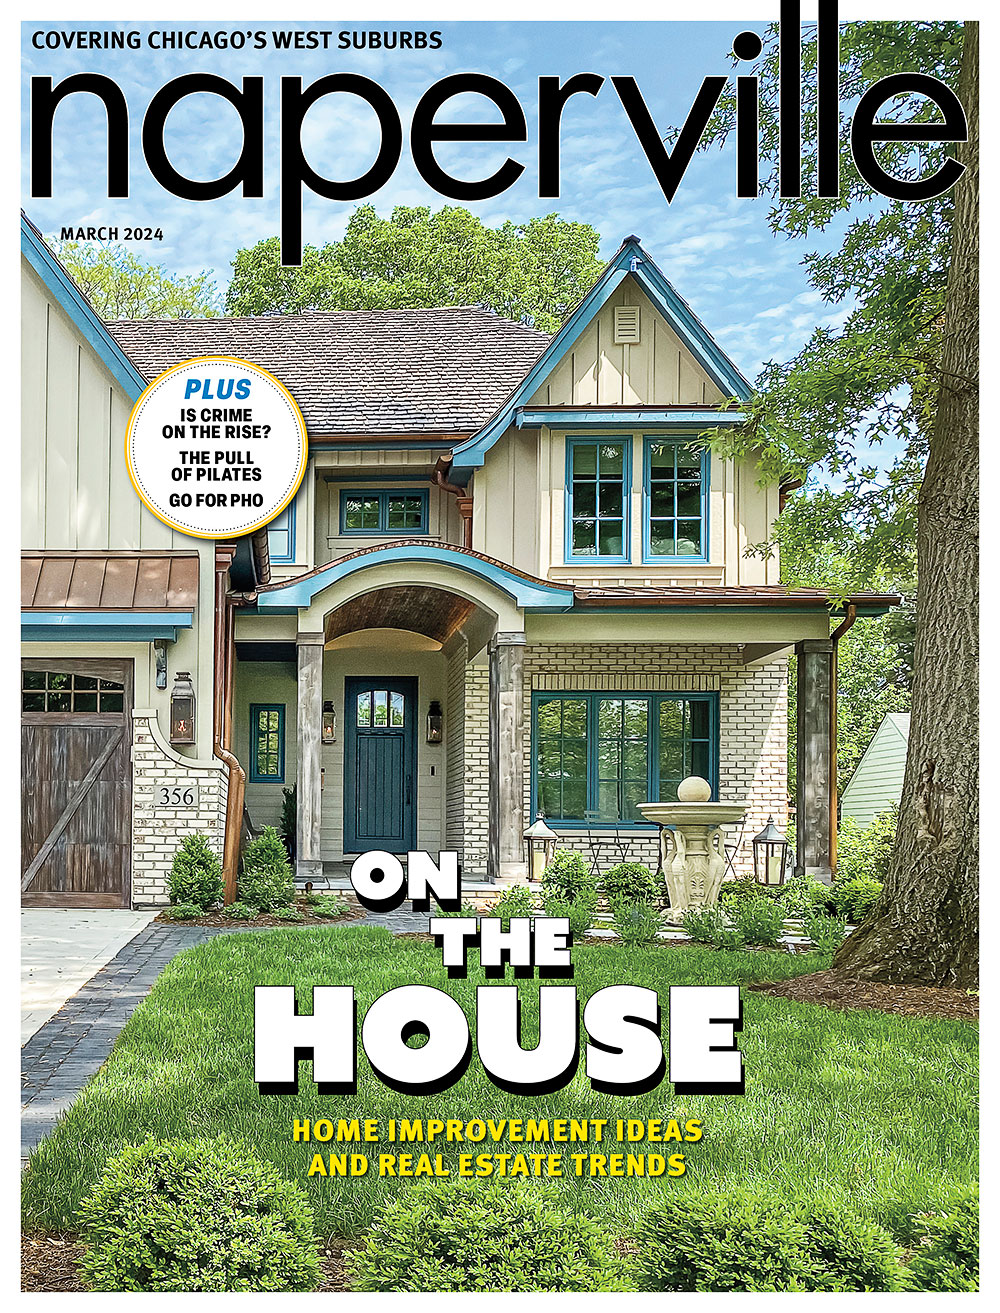 March 2024 Naperville cover